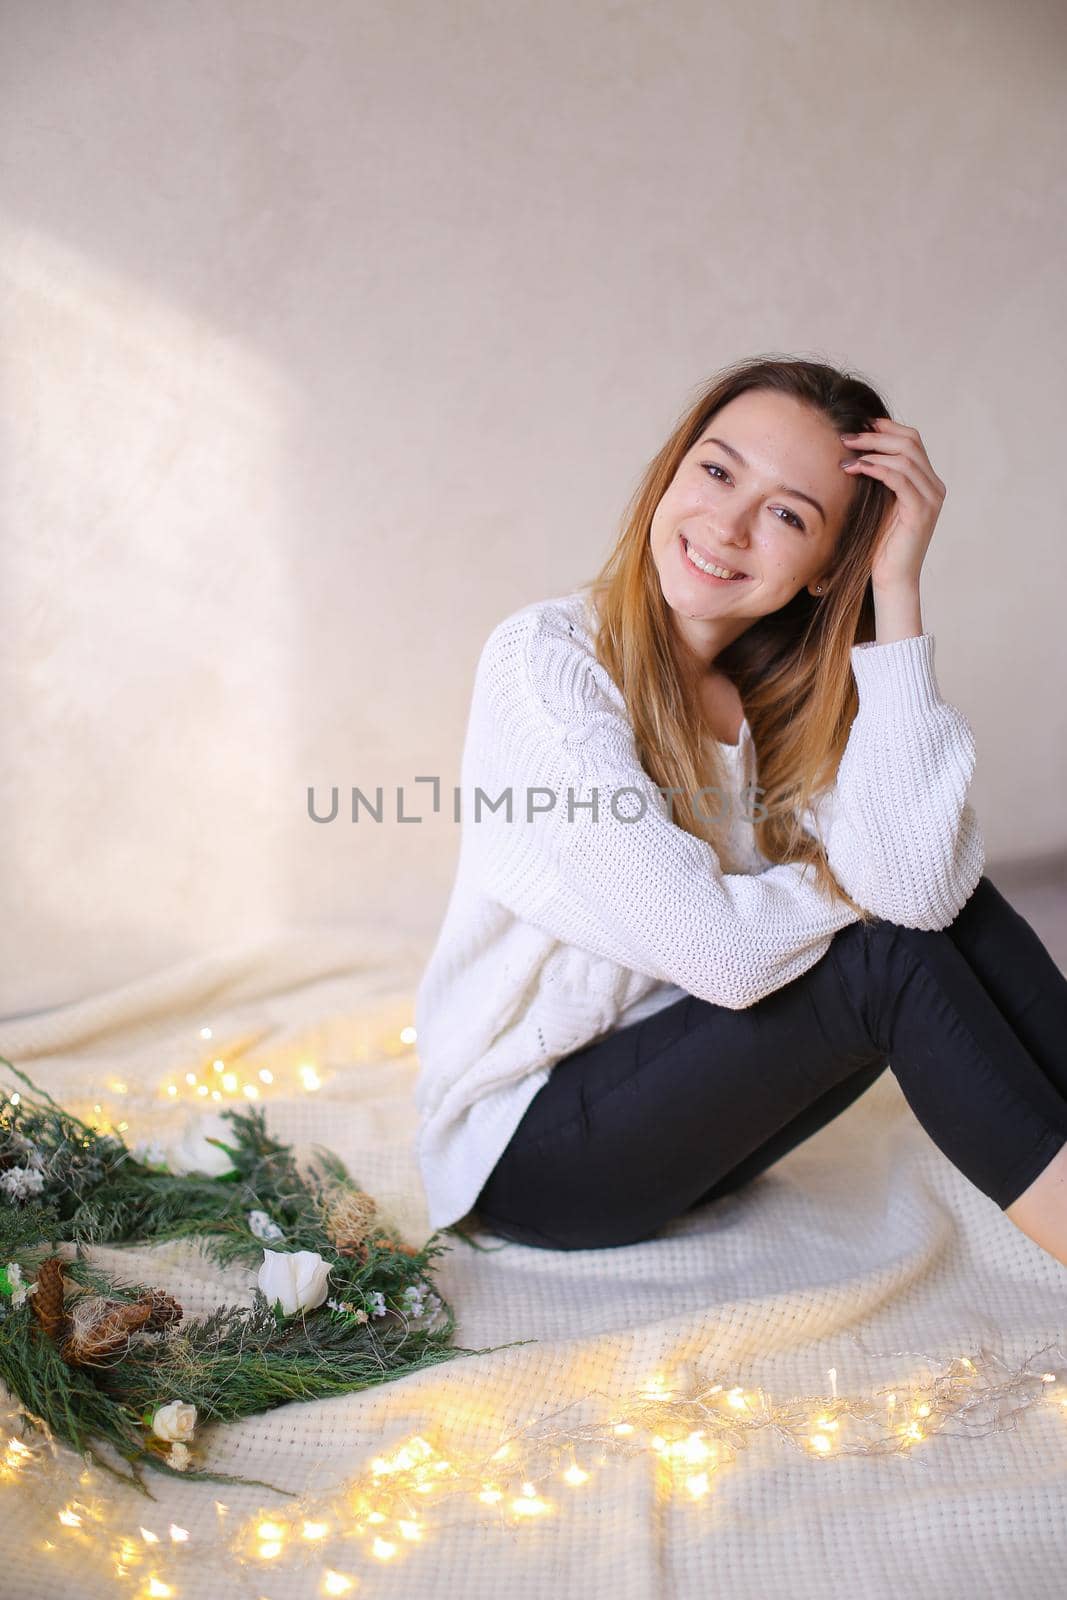 Young happy woman sitting on bed near wreath and yellow garlands. Concept of handmade decorations for Christmas and winter holidays.